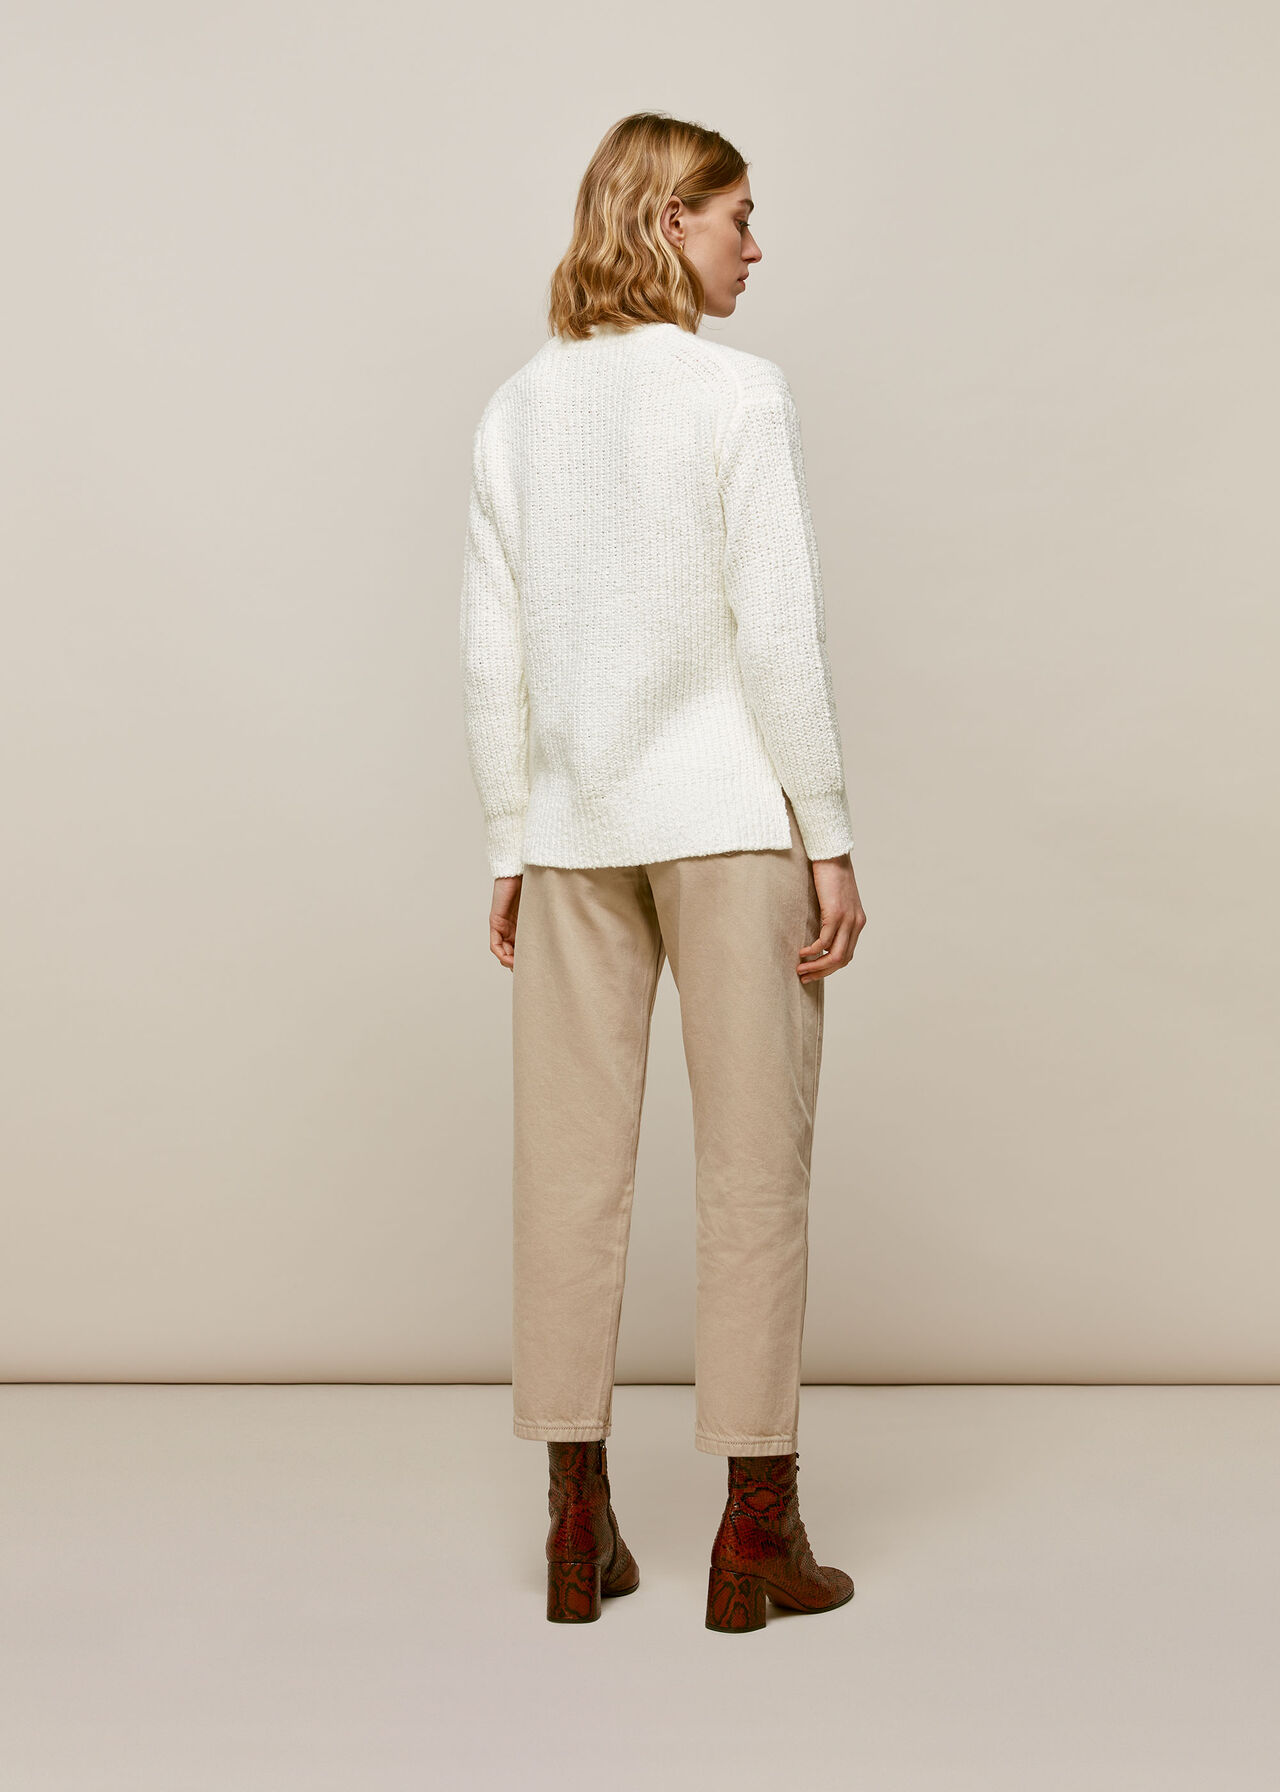 Madeline Textured Knit Ivory